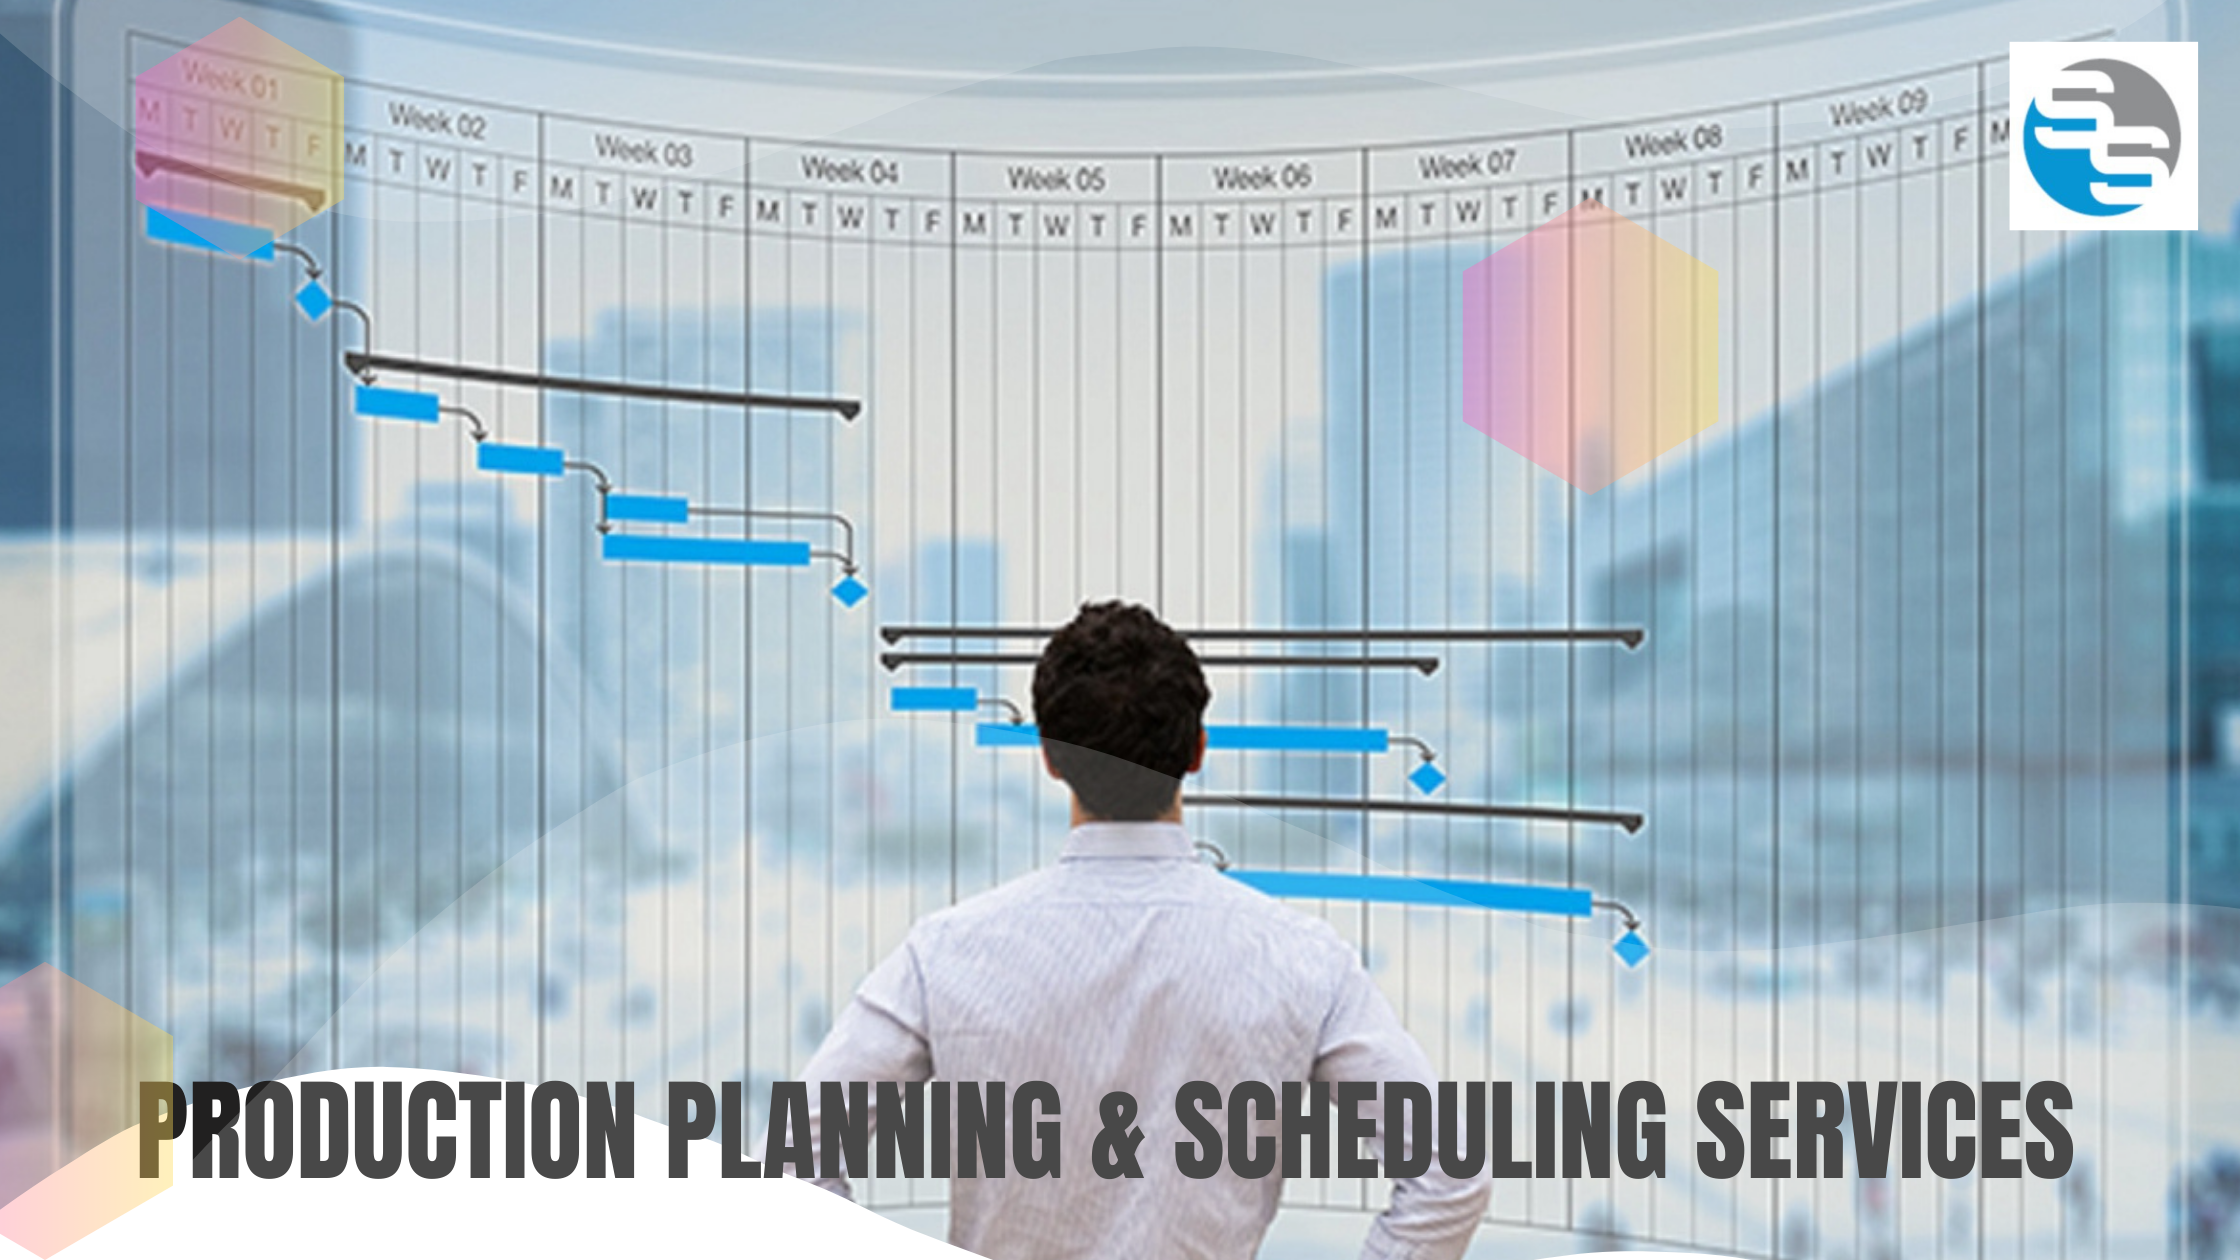 Production Planning & Scheduling services - LSI Scheduling Solutions